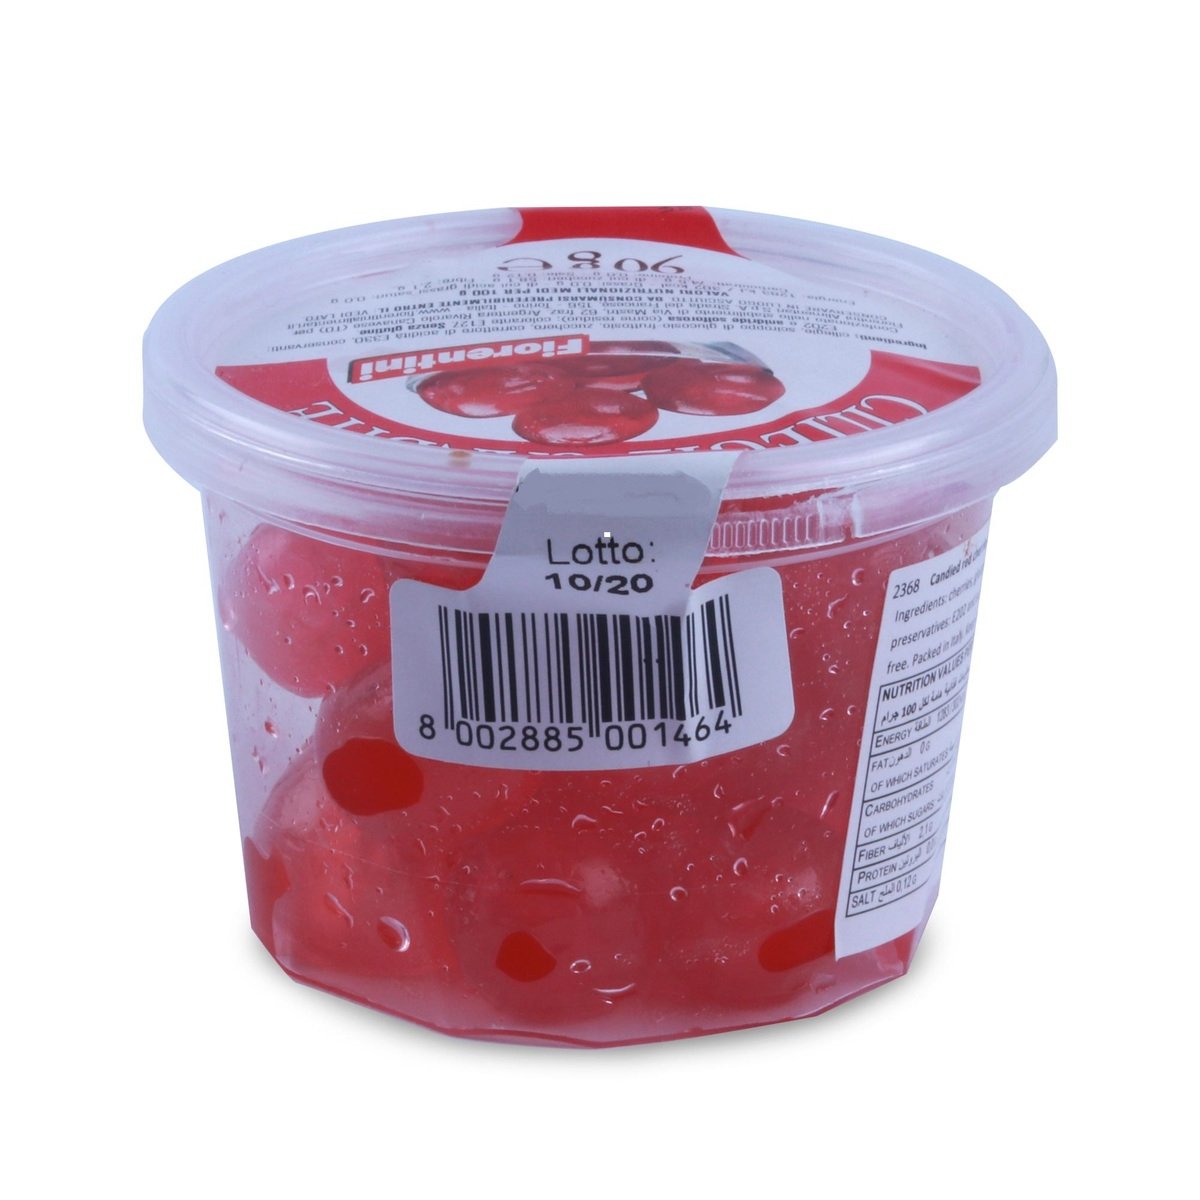 Fiorentini Cilie Gie Candite Red Cherry 90 g